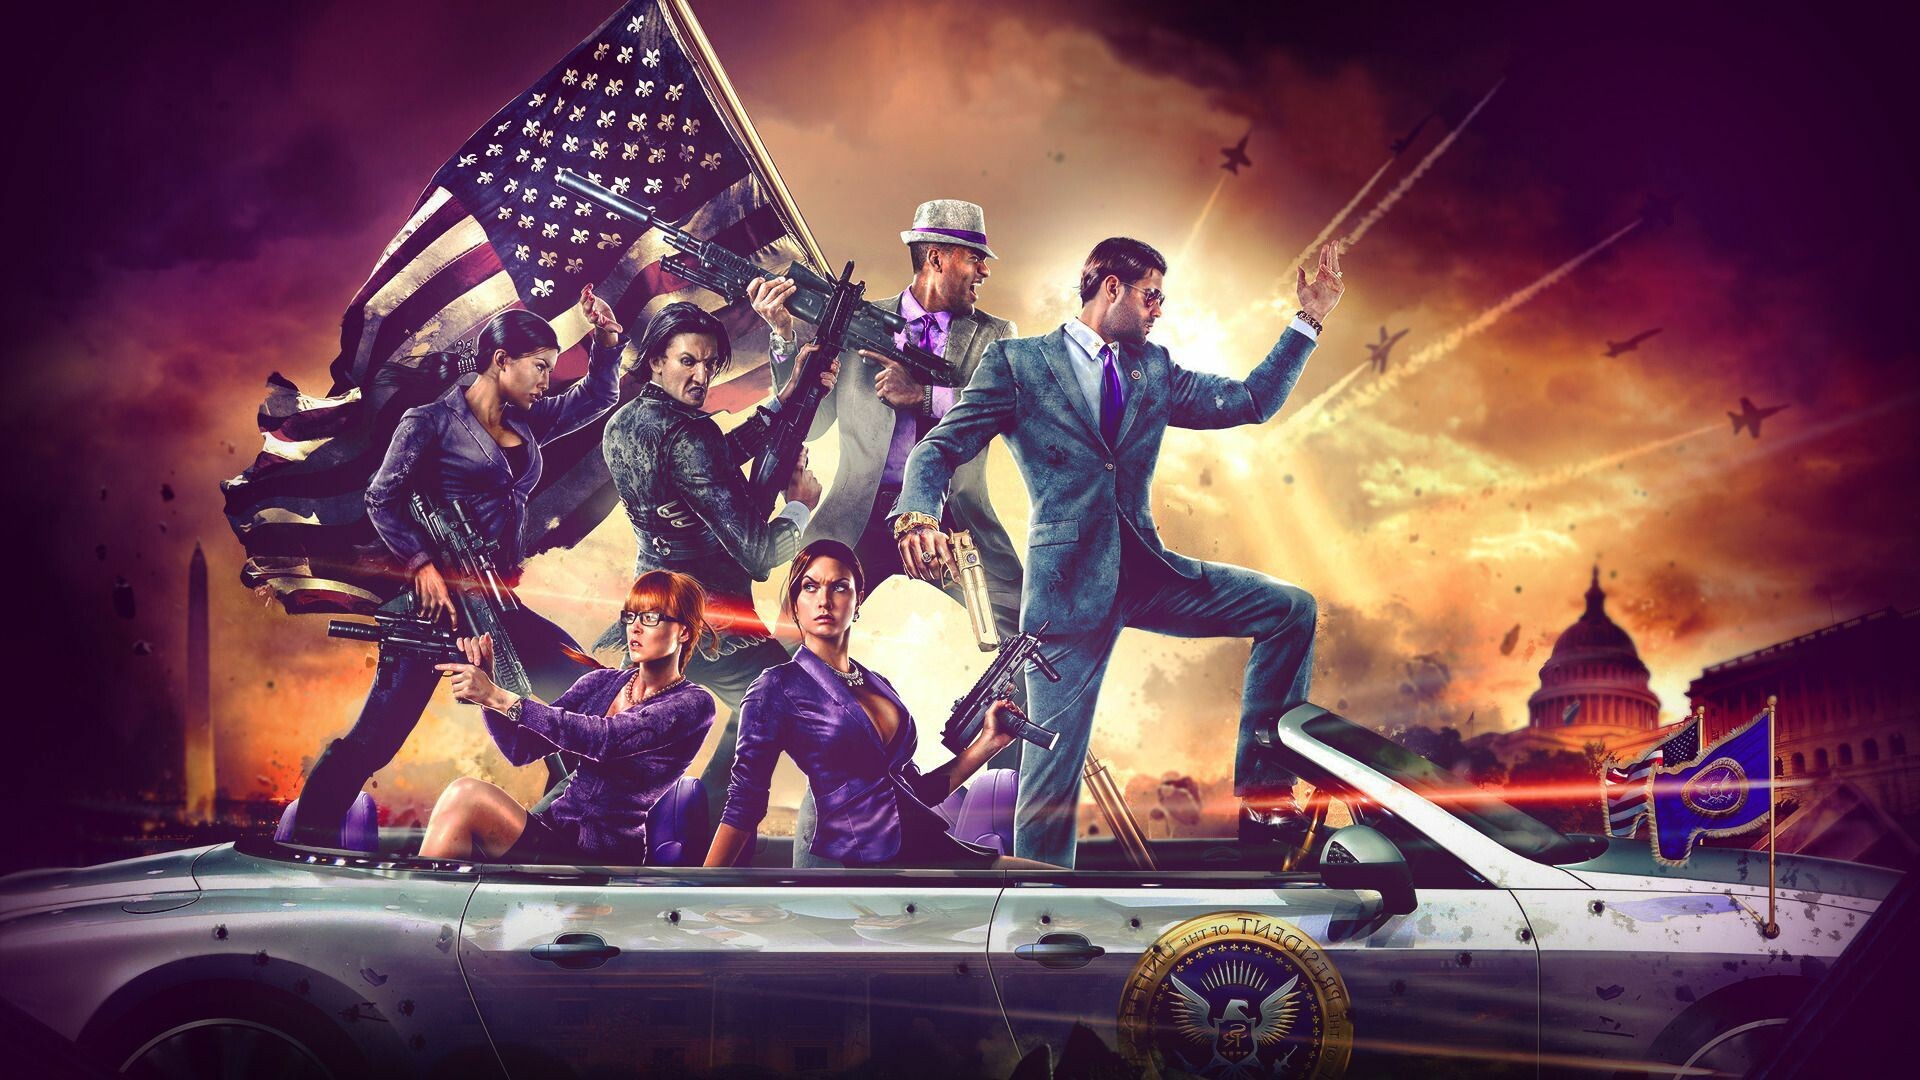 Saints Row 4, 4K HD wallpapers, Action-packed game, Thrilling backgrounds, 1920x1080 Full HD Desktop